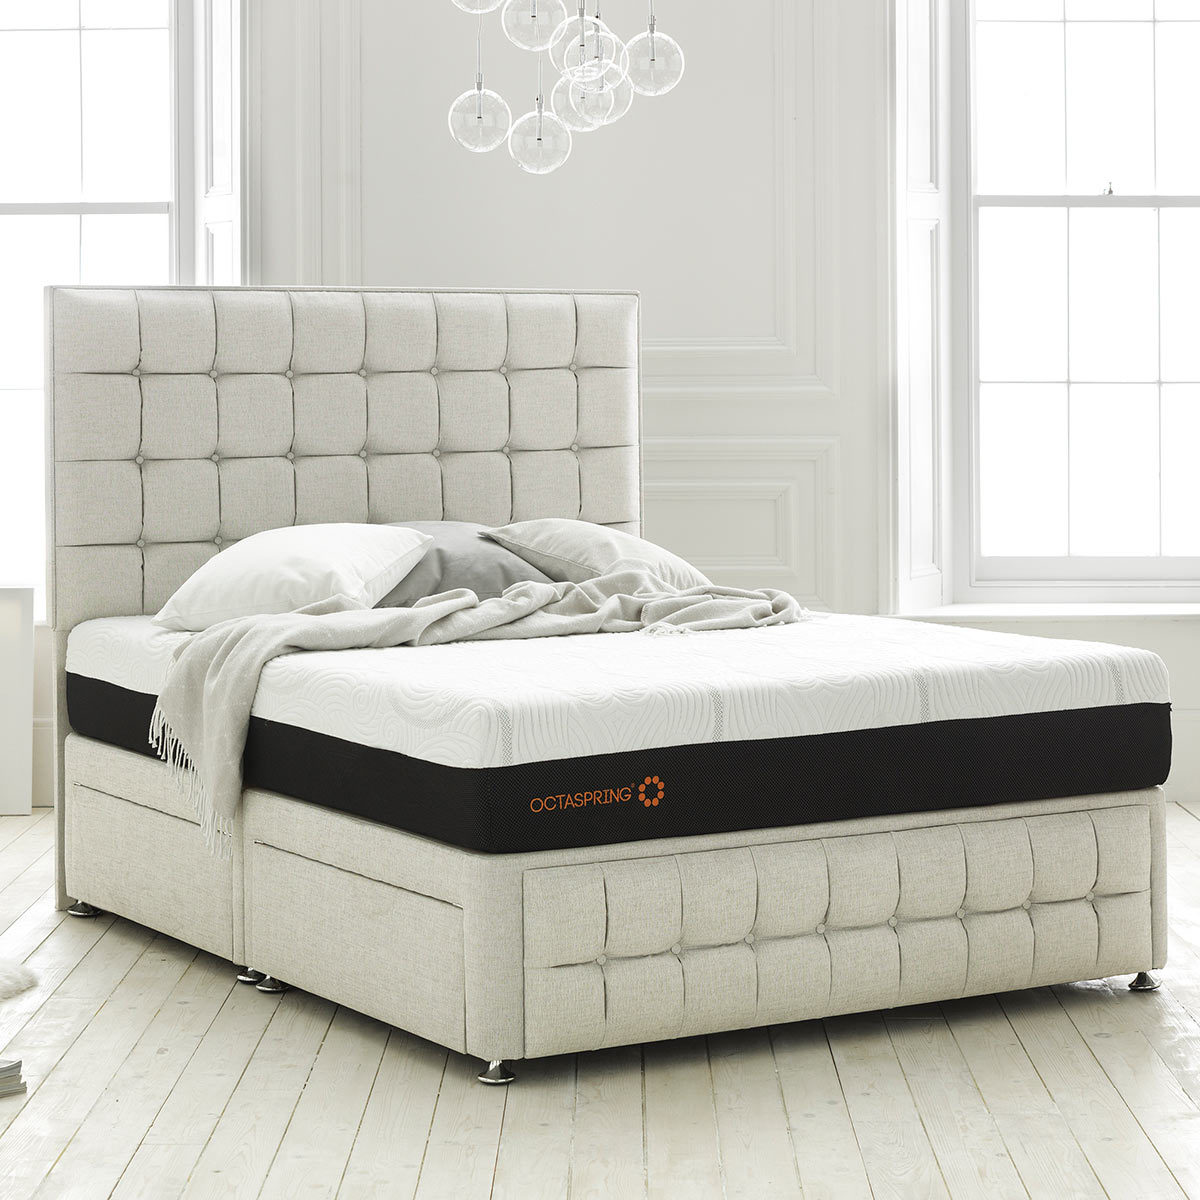 Octaspring Sirocco Mattress and Venice Divan with Headboard in White Sand, Single